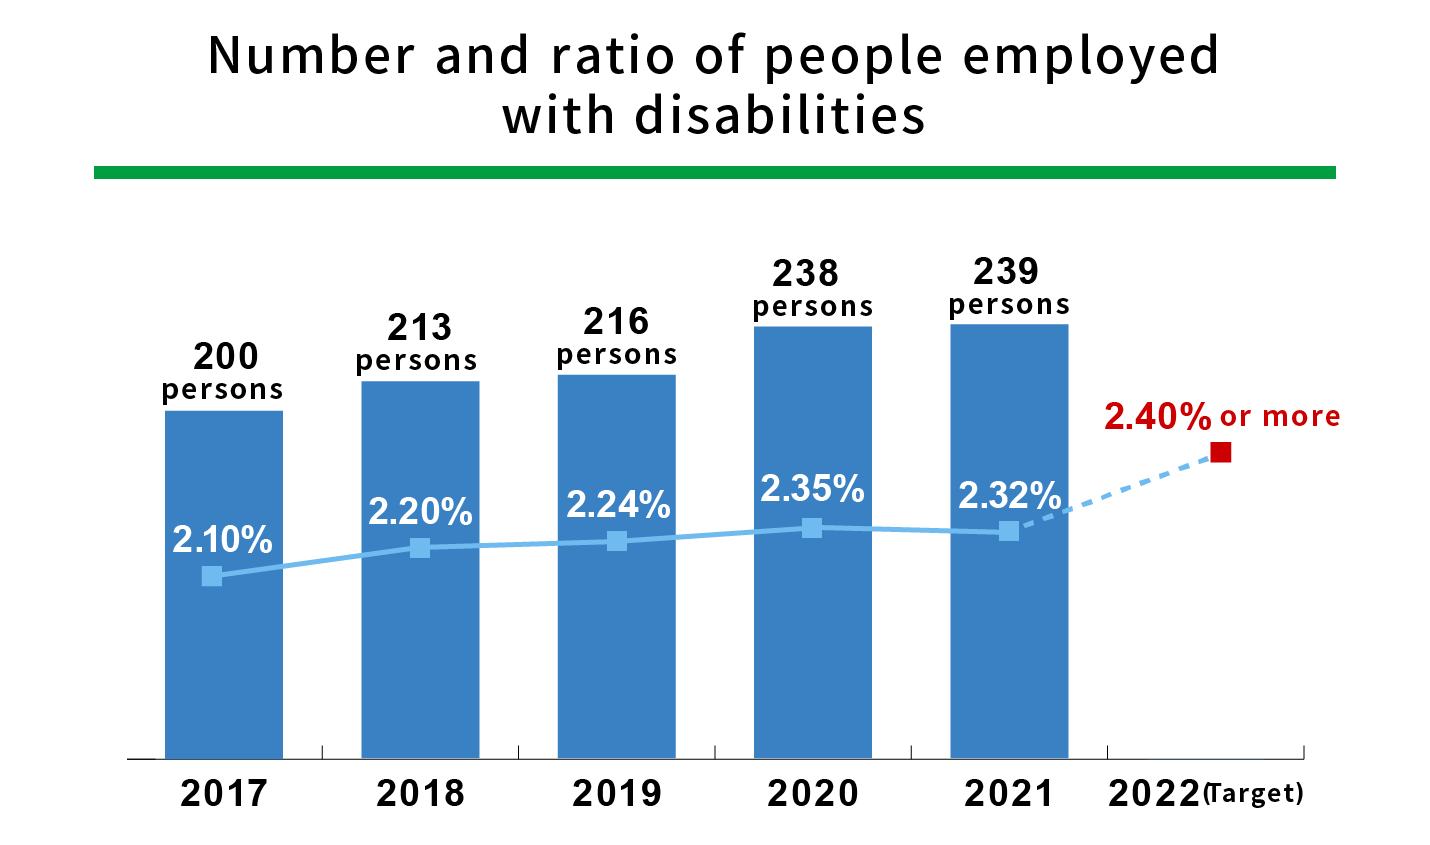 Number and ratio of people employed with disabilities